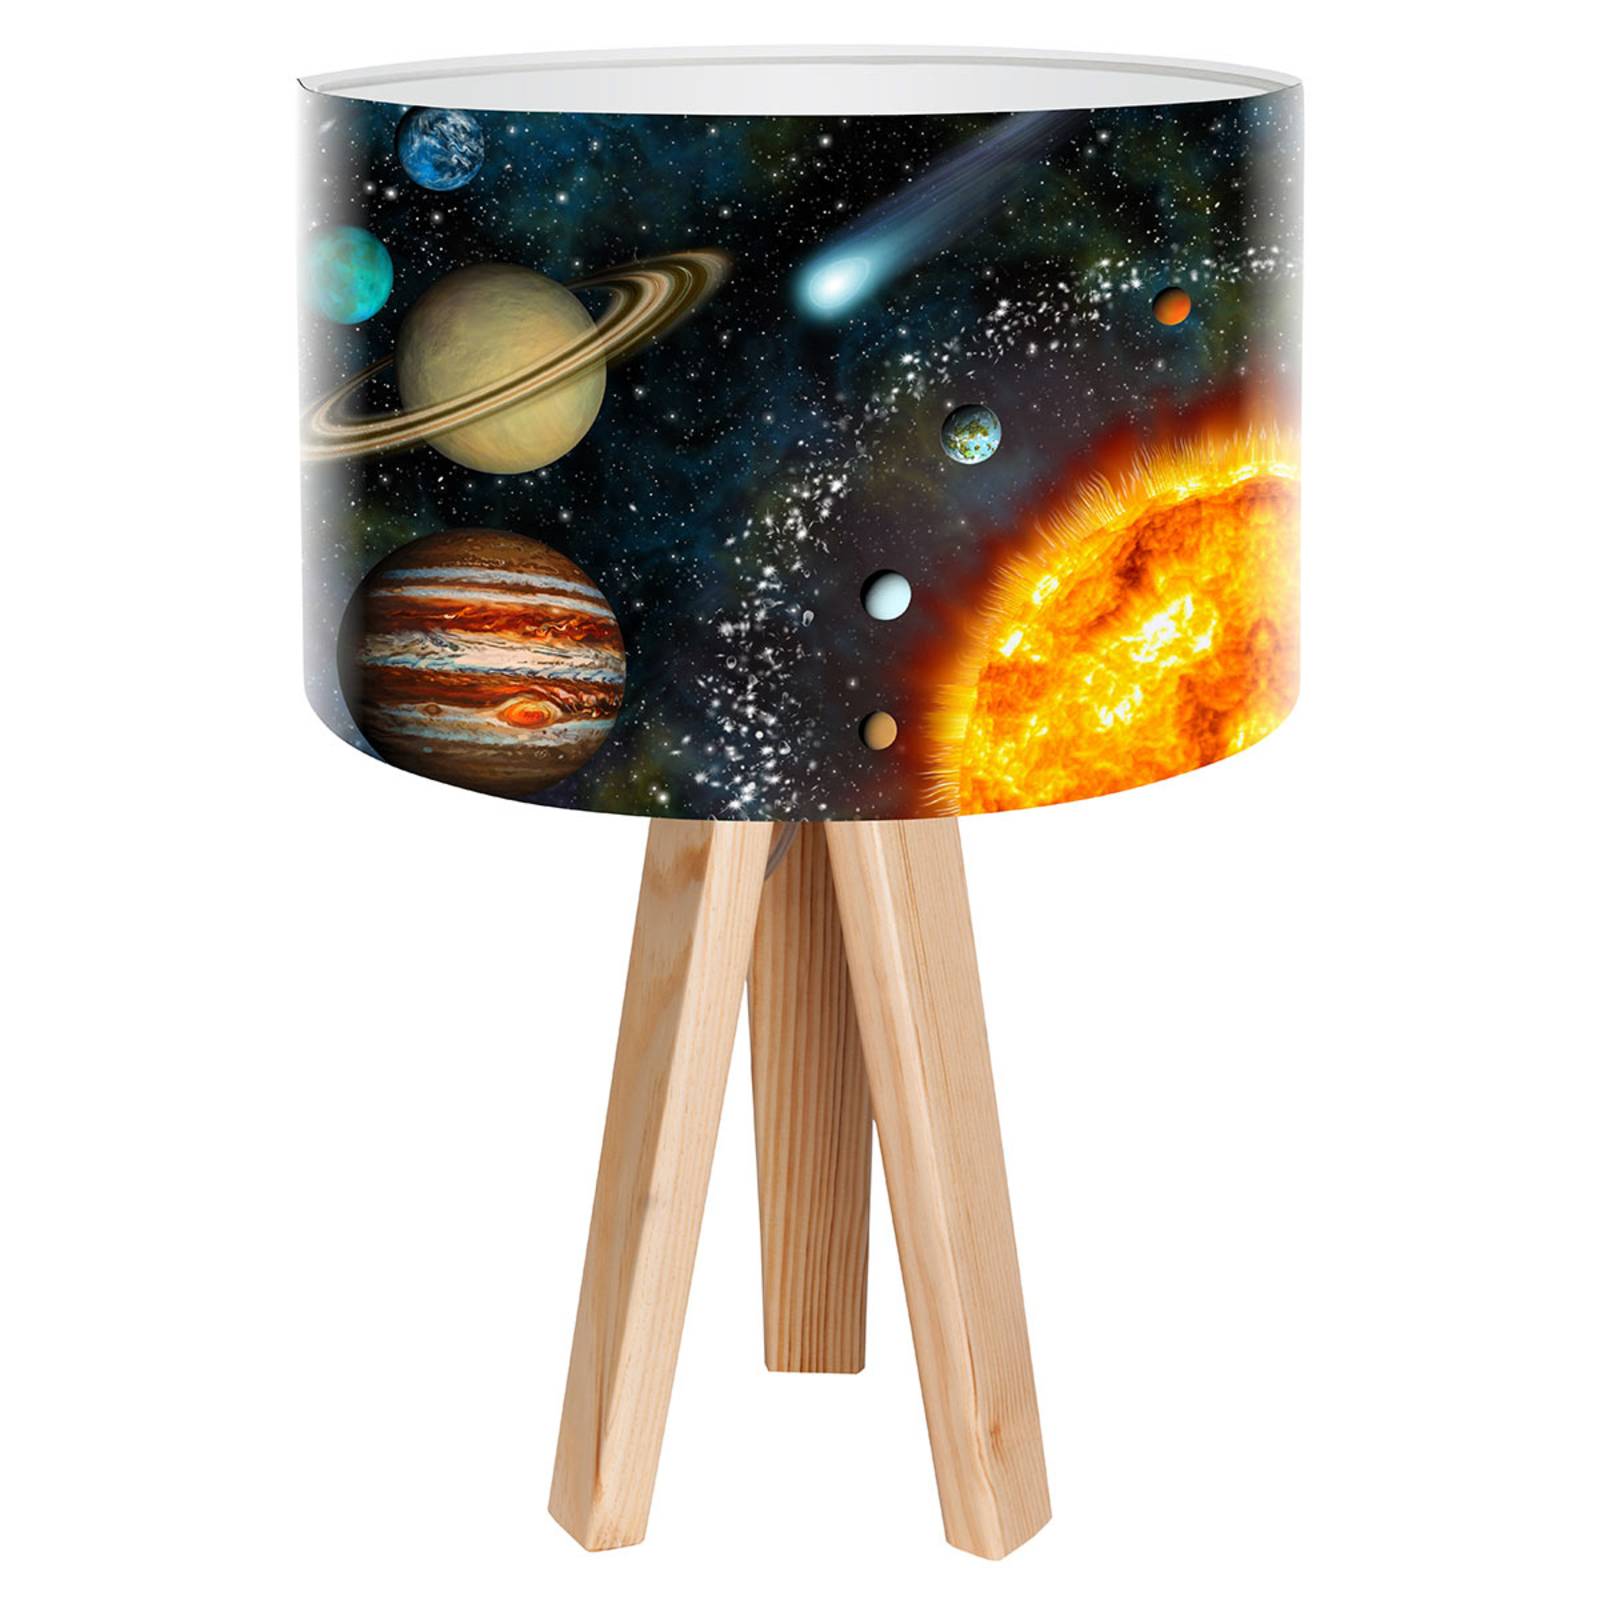 Space table lamp with a realistic space print | Lights.co.uk